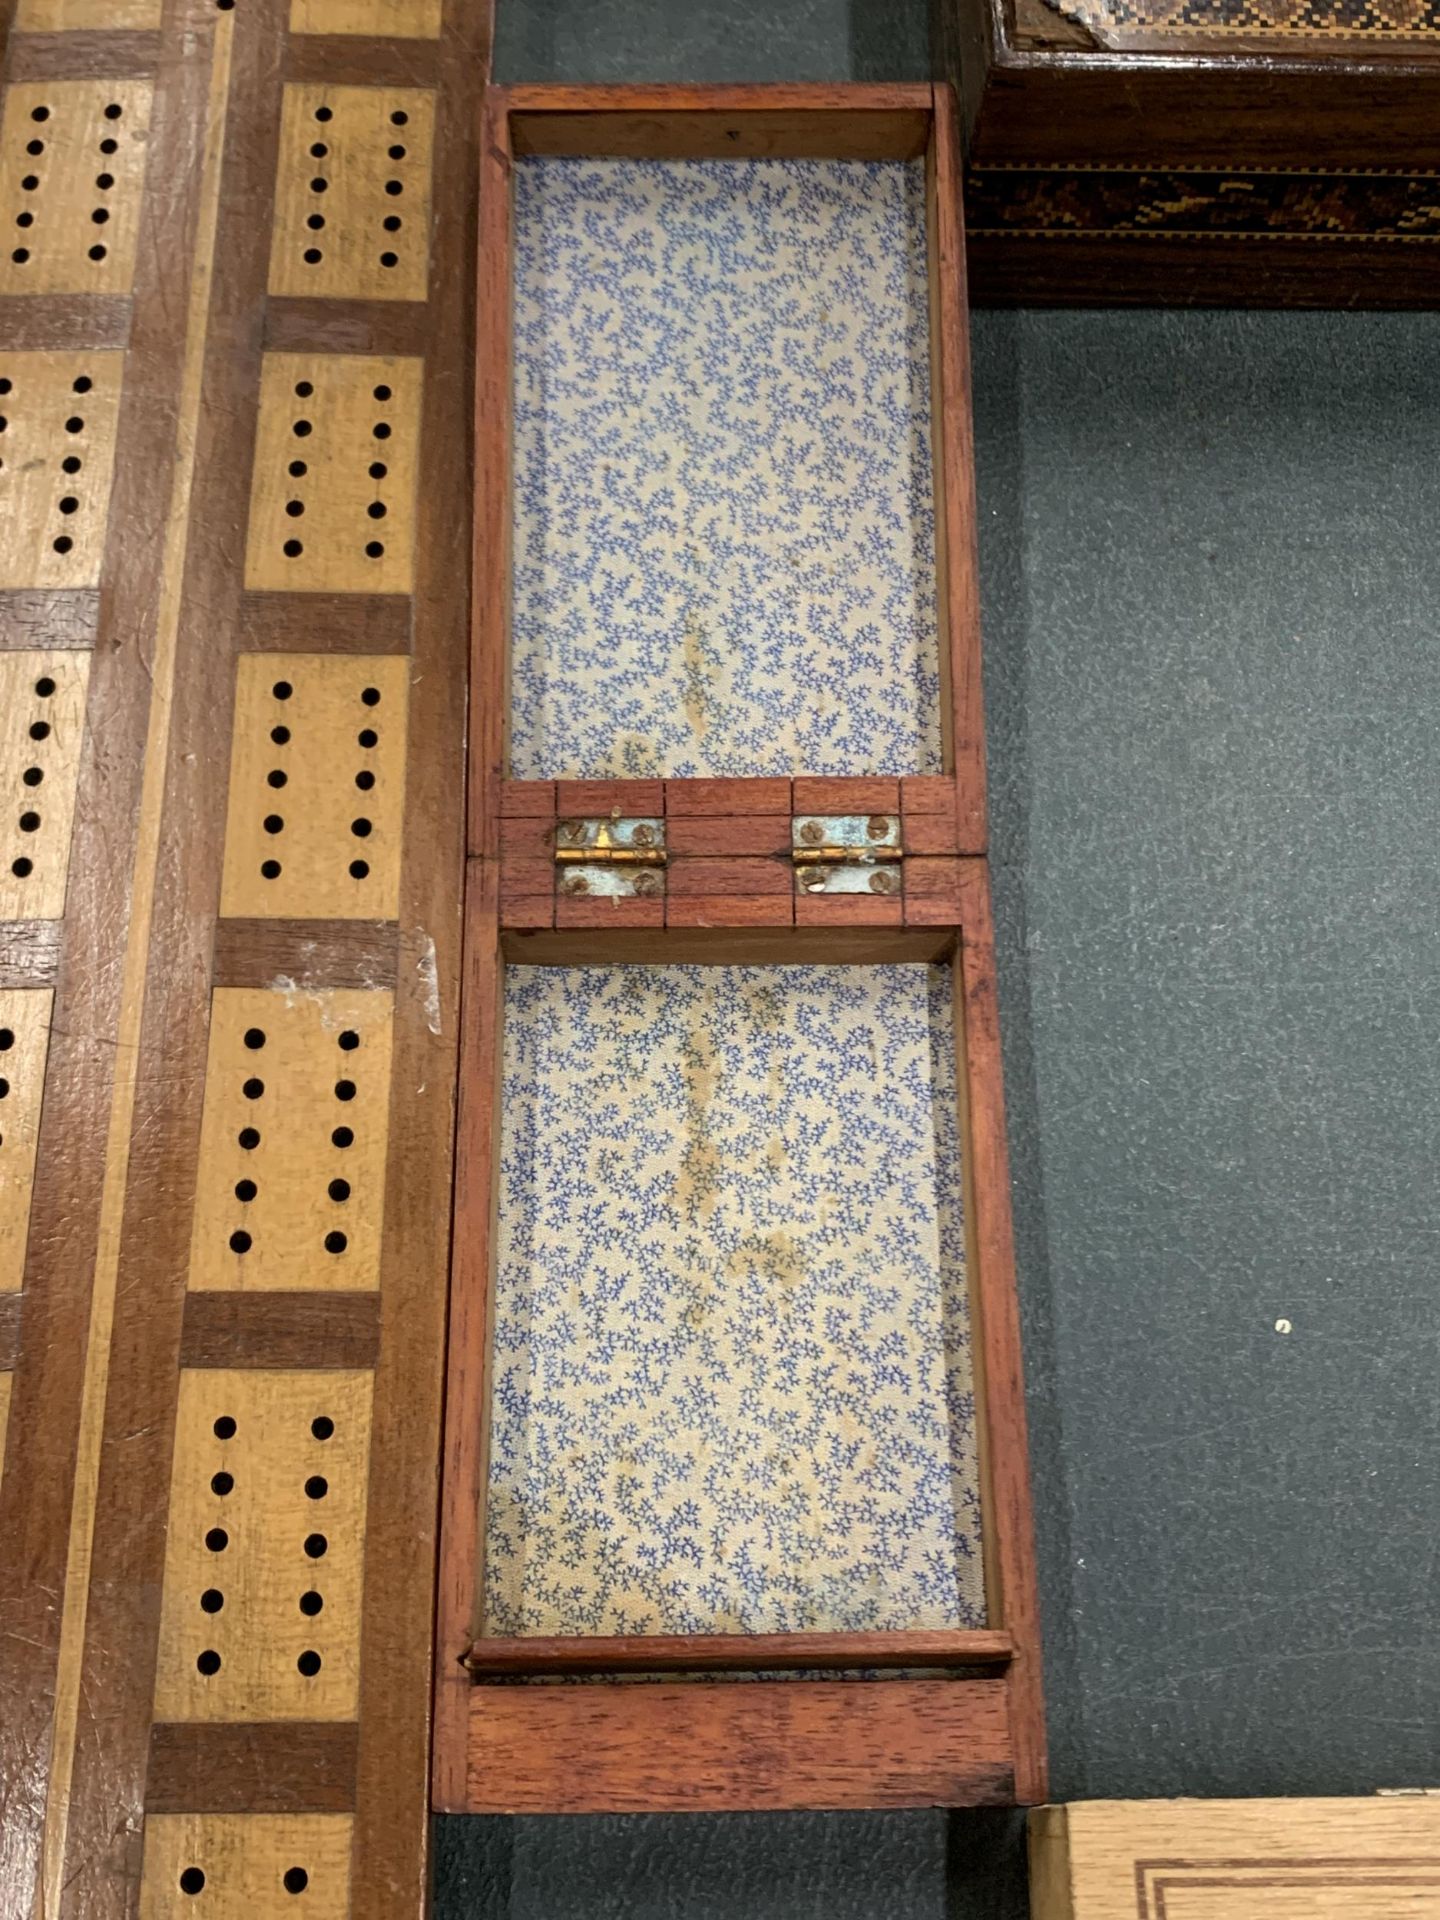 TWO CRIBBAGE BOARDS - Image 3 of 4